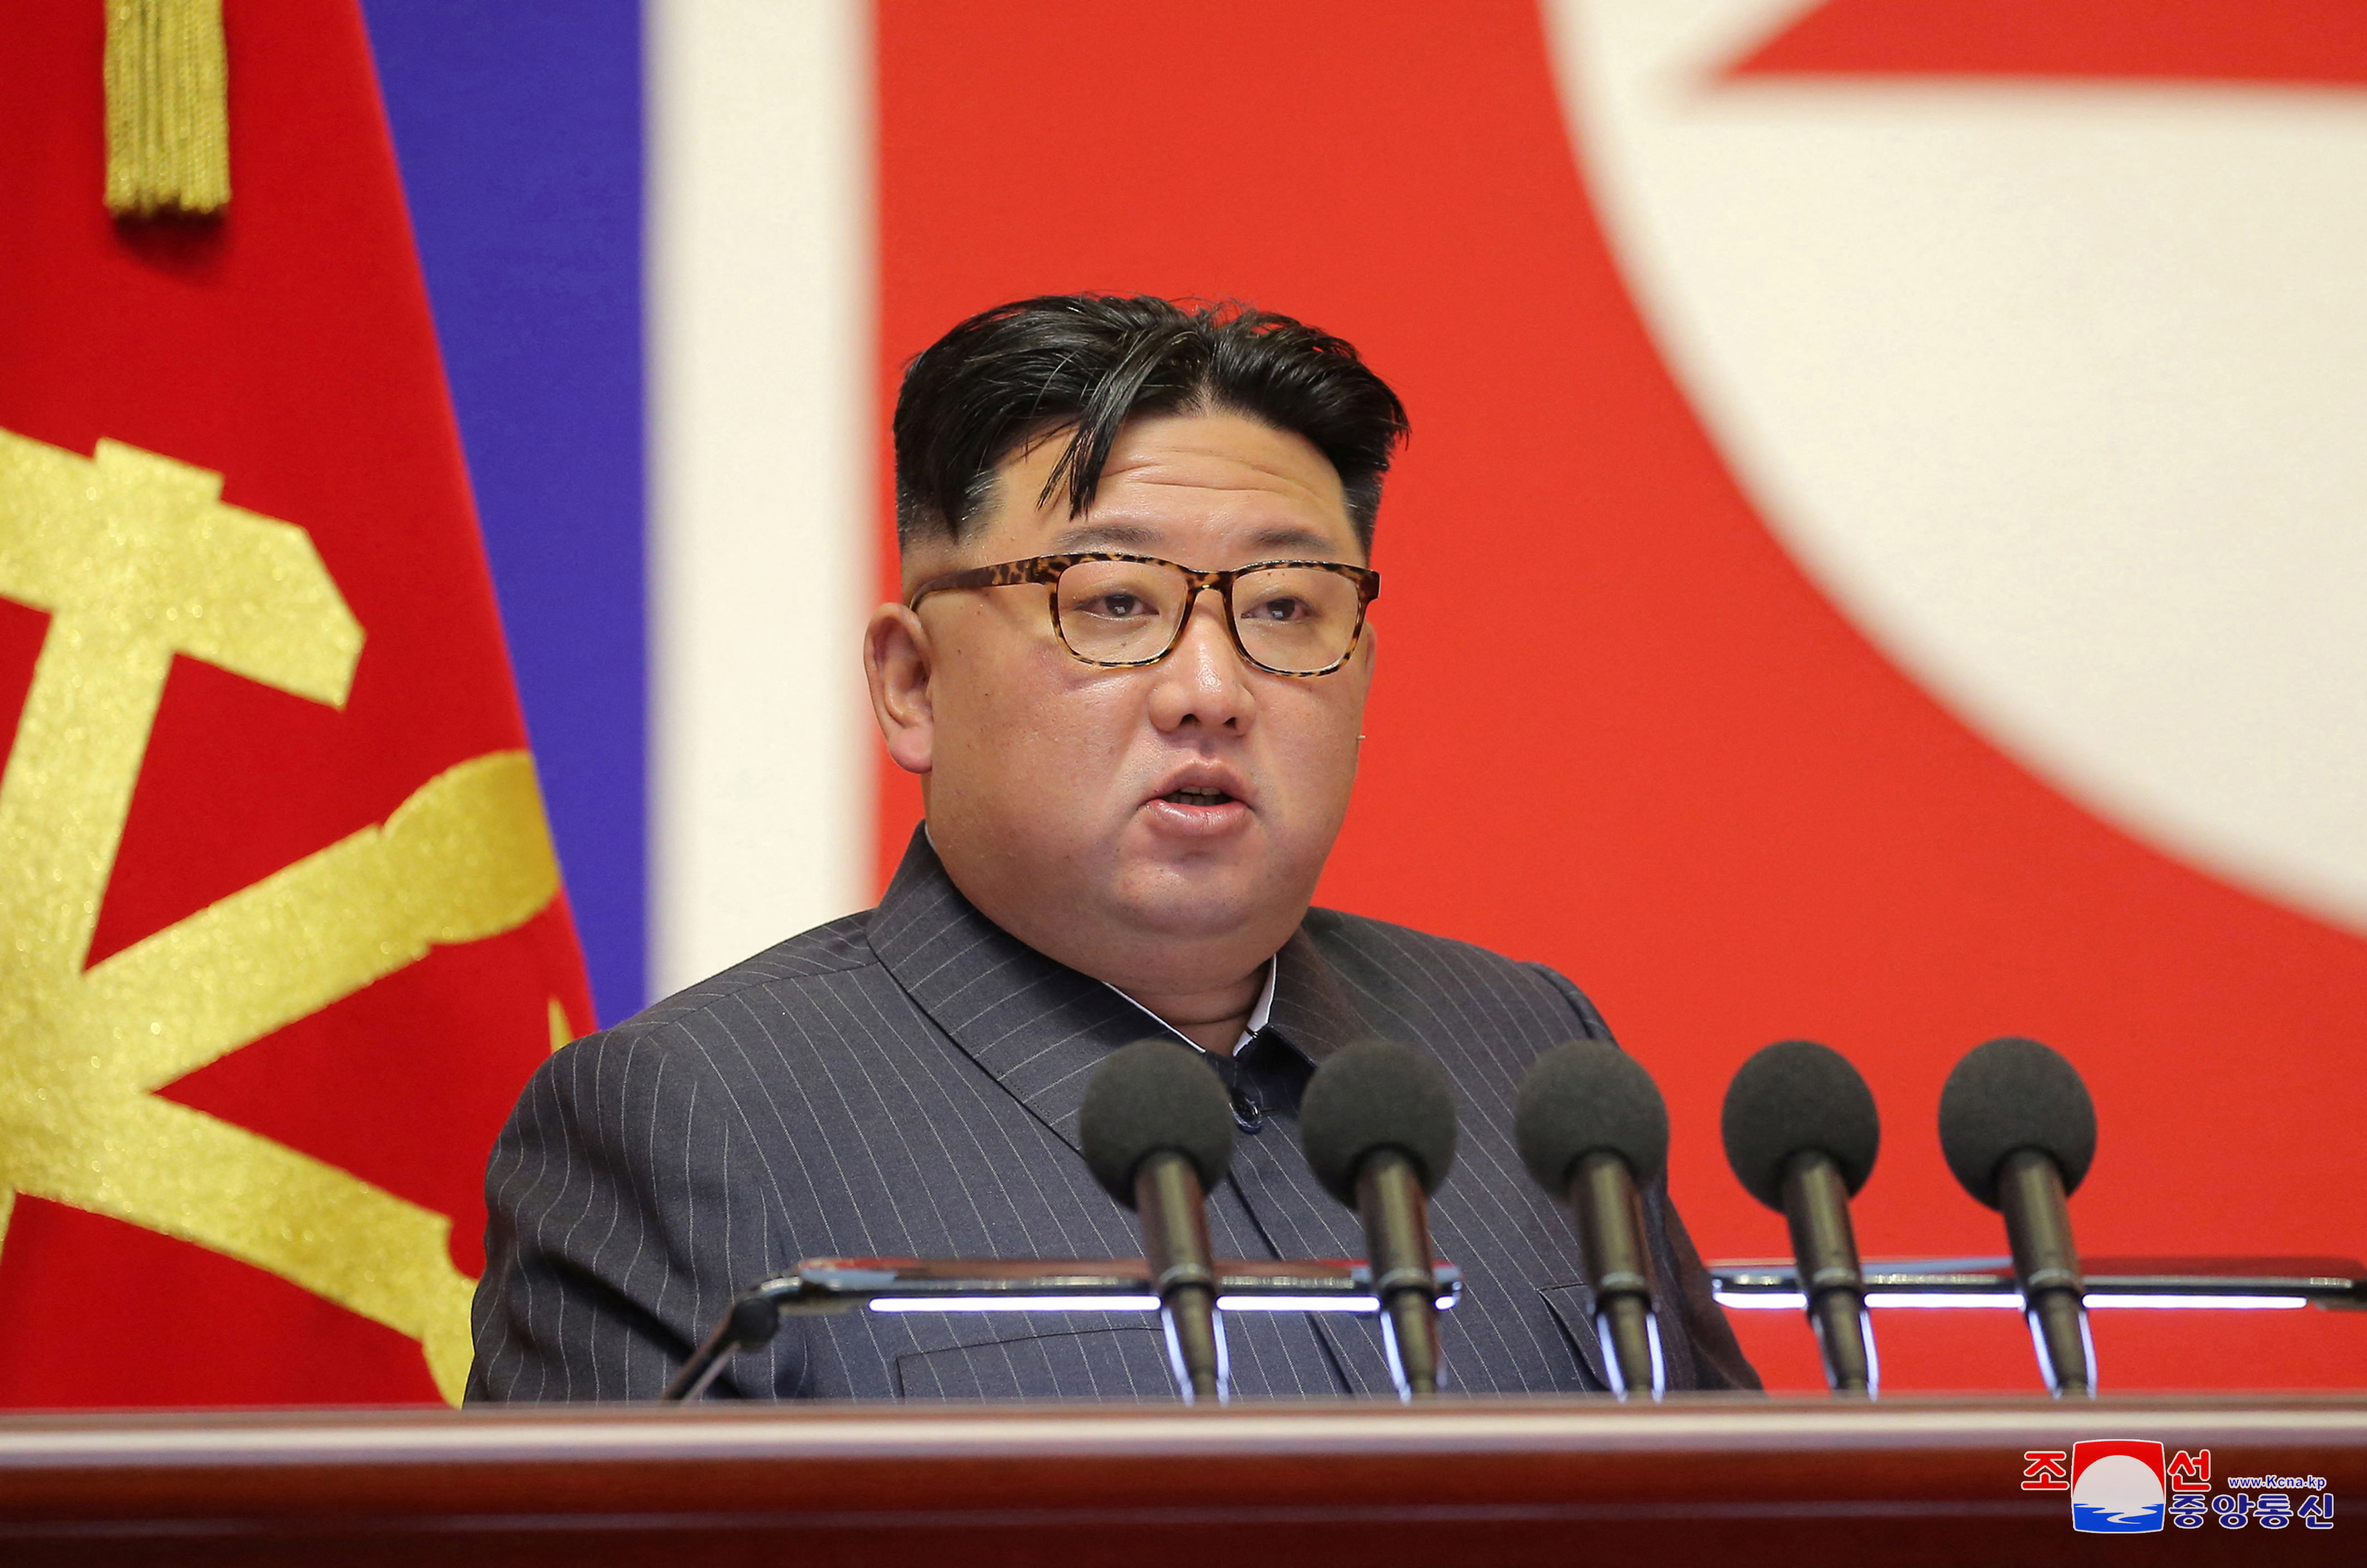 North Korea's leader Kim Jong Un speaks during a meeting to review the state's disaster prevention work in Pyongyang